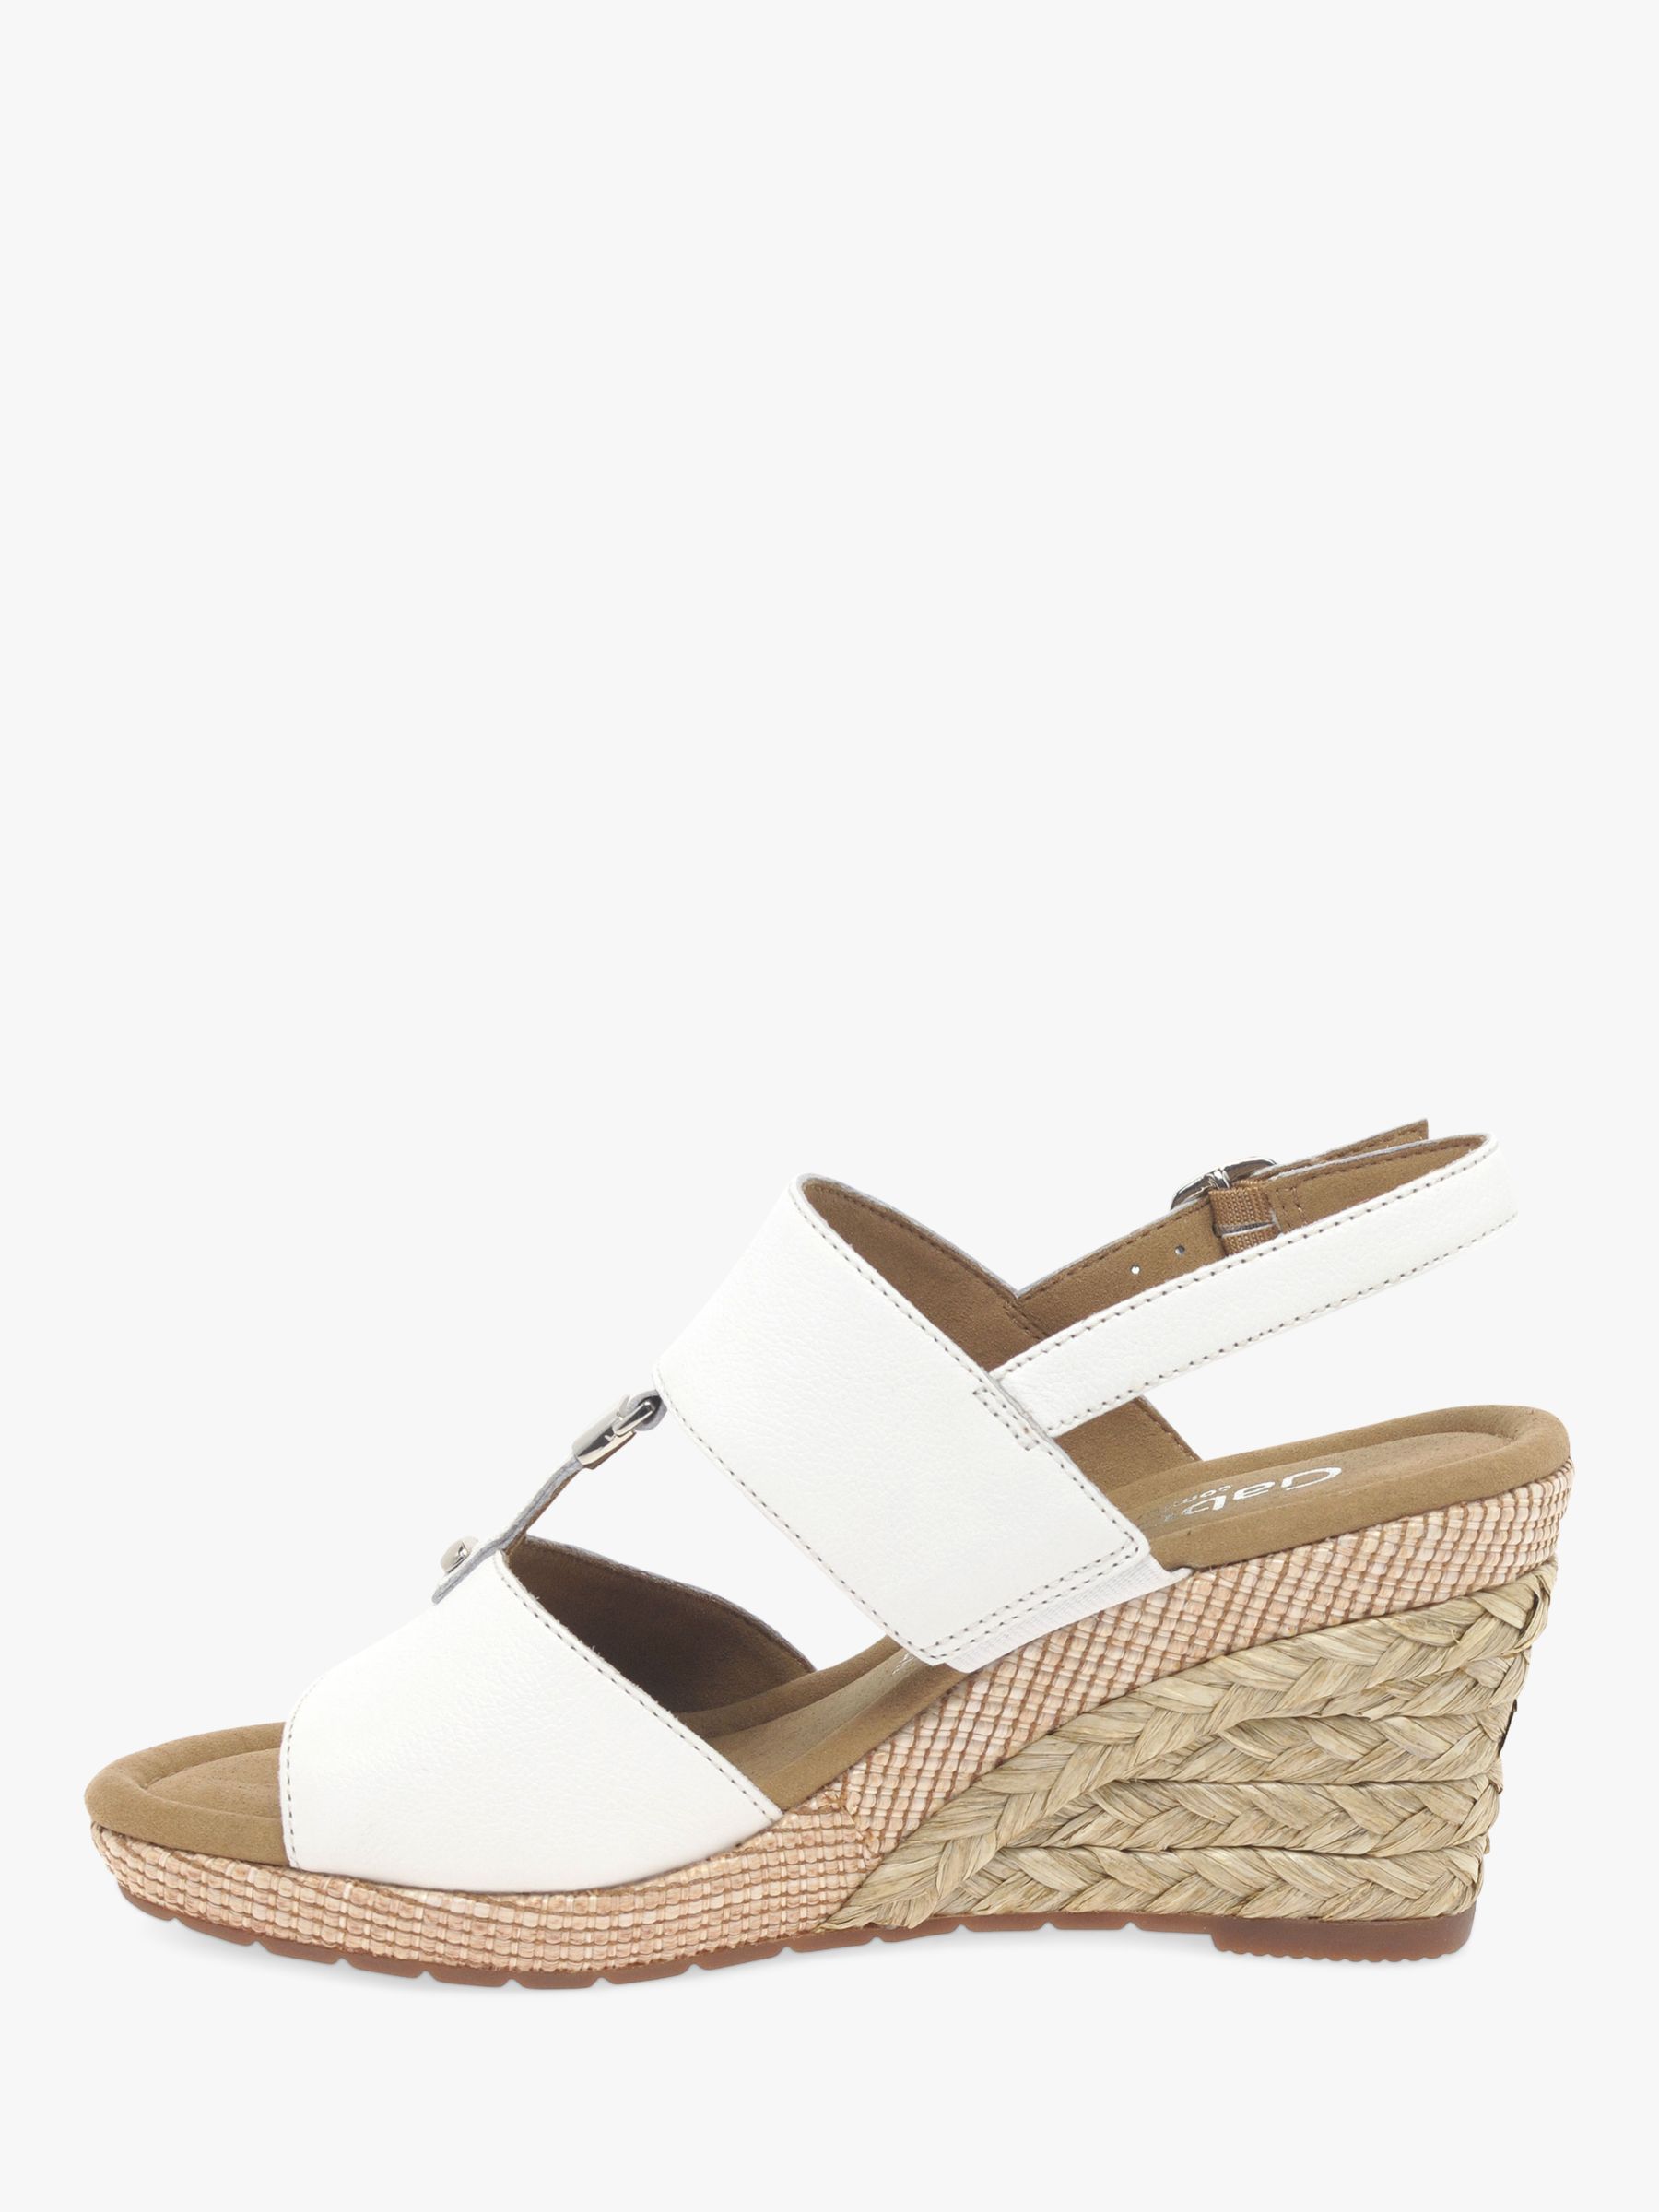 Gabor Keira Wide Fit Wedge Sandals